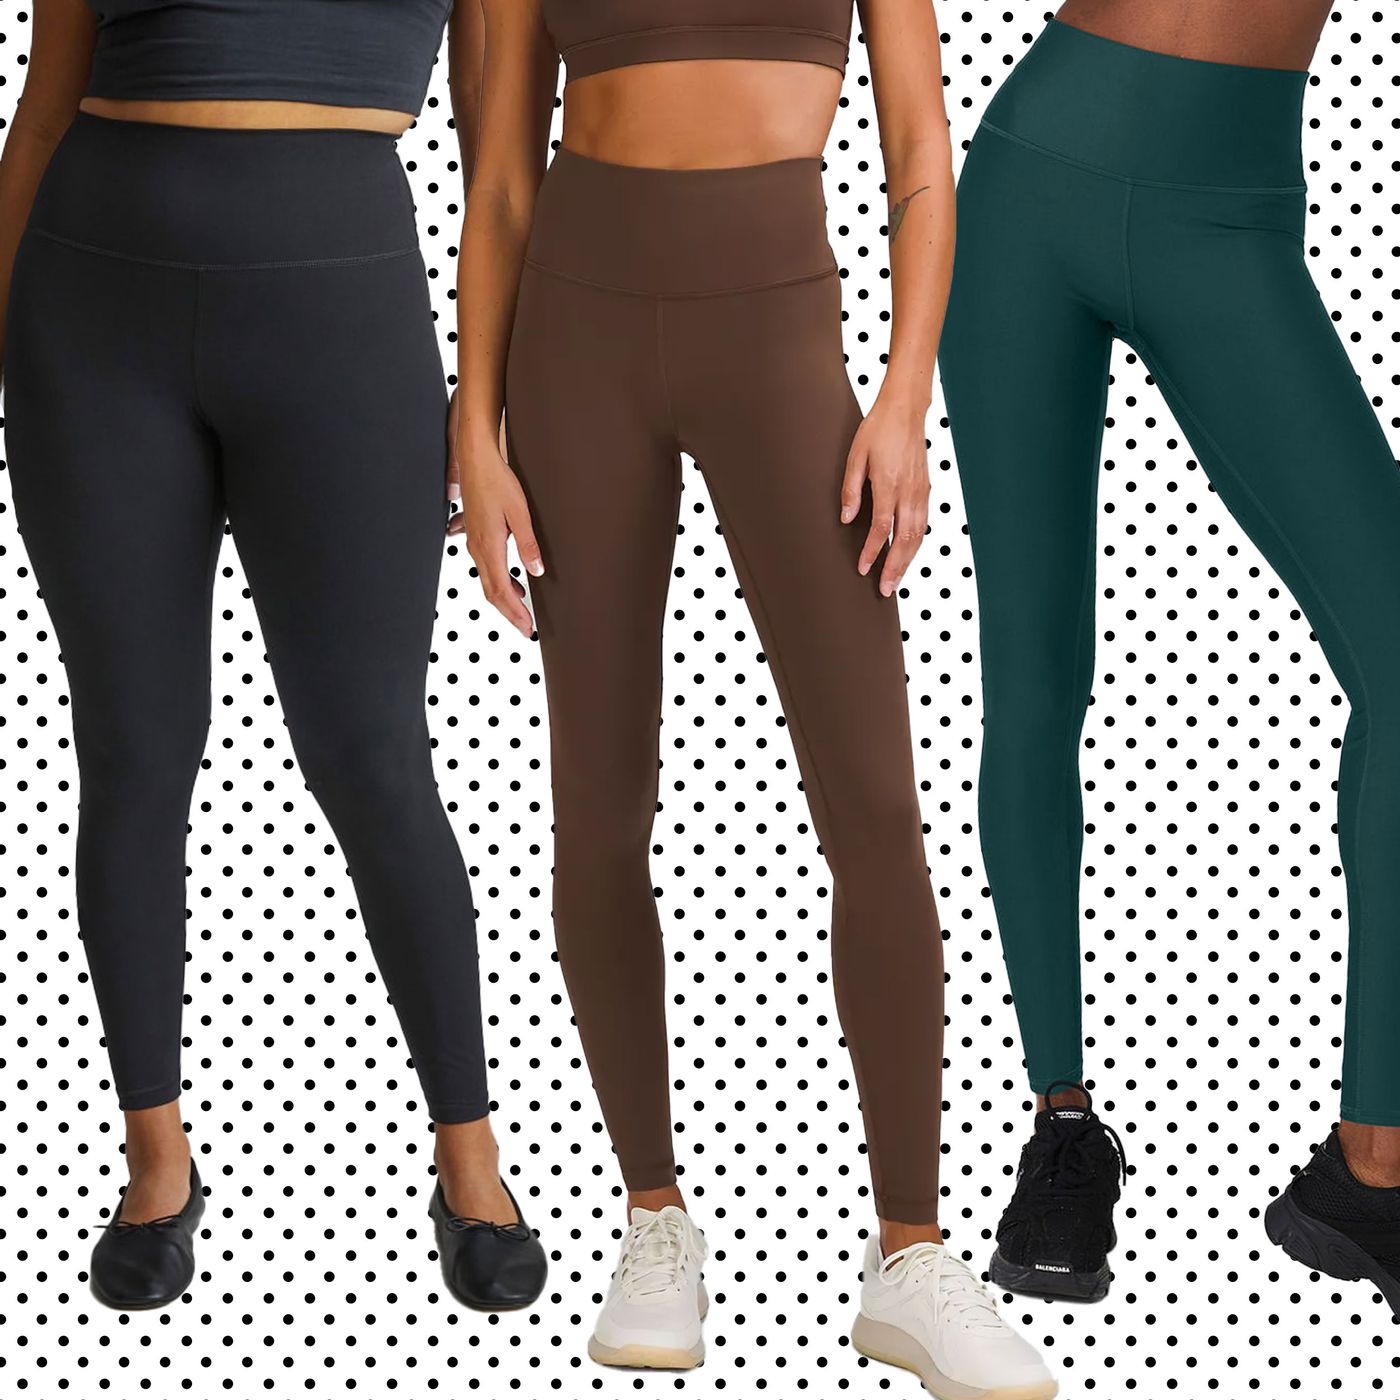 Workout Leggings & Pants for Women - Athletic & Gym Tights | RVCA-cacanhphuclong.com.vn